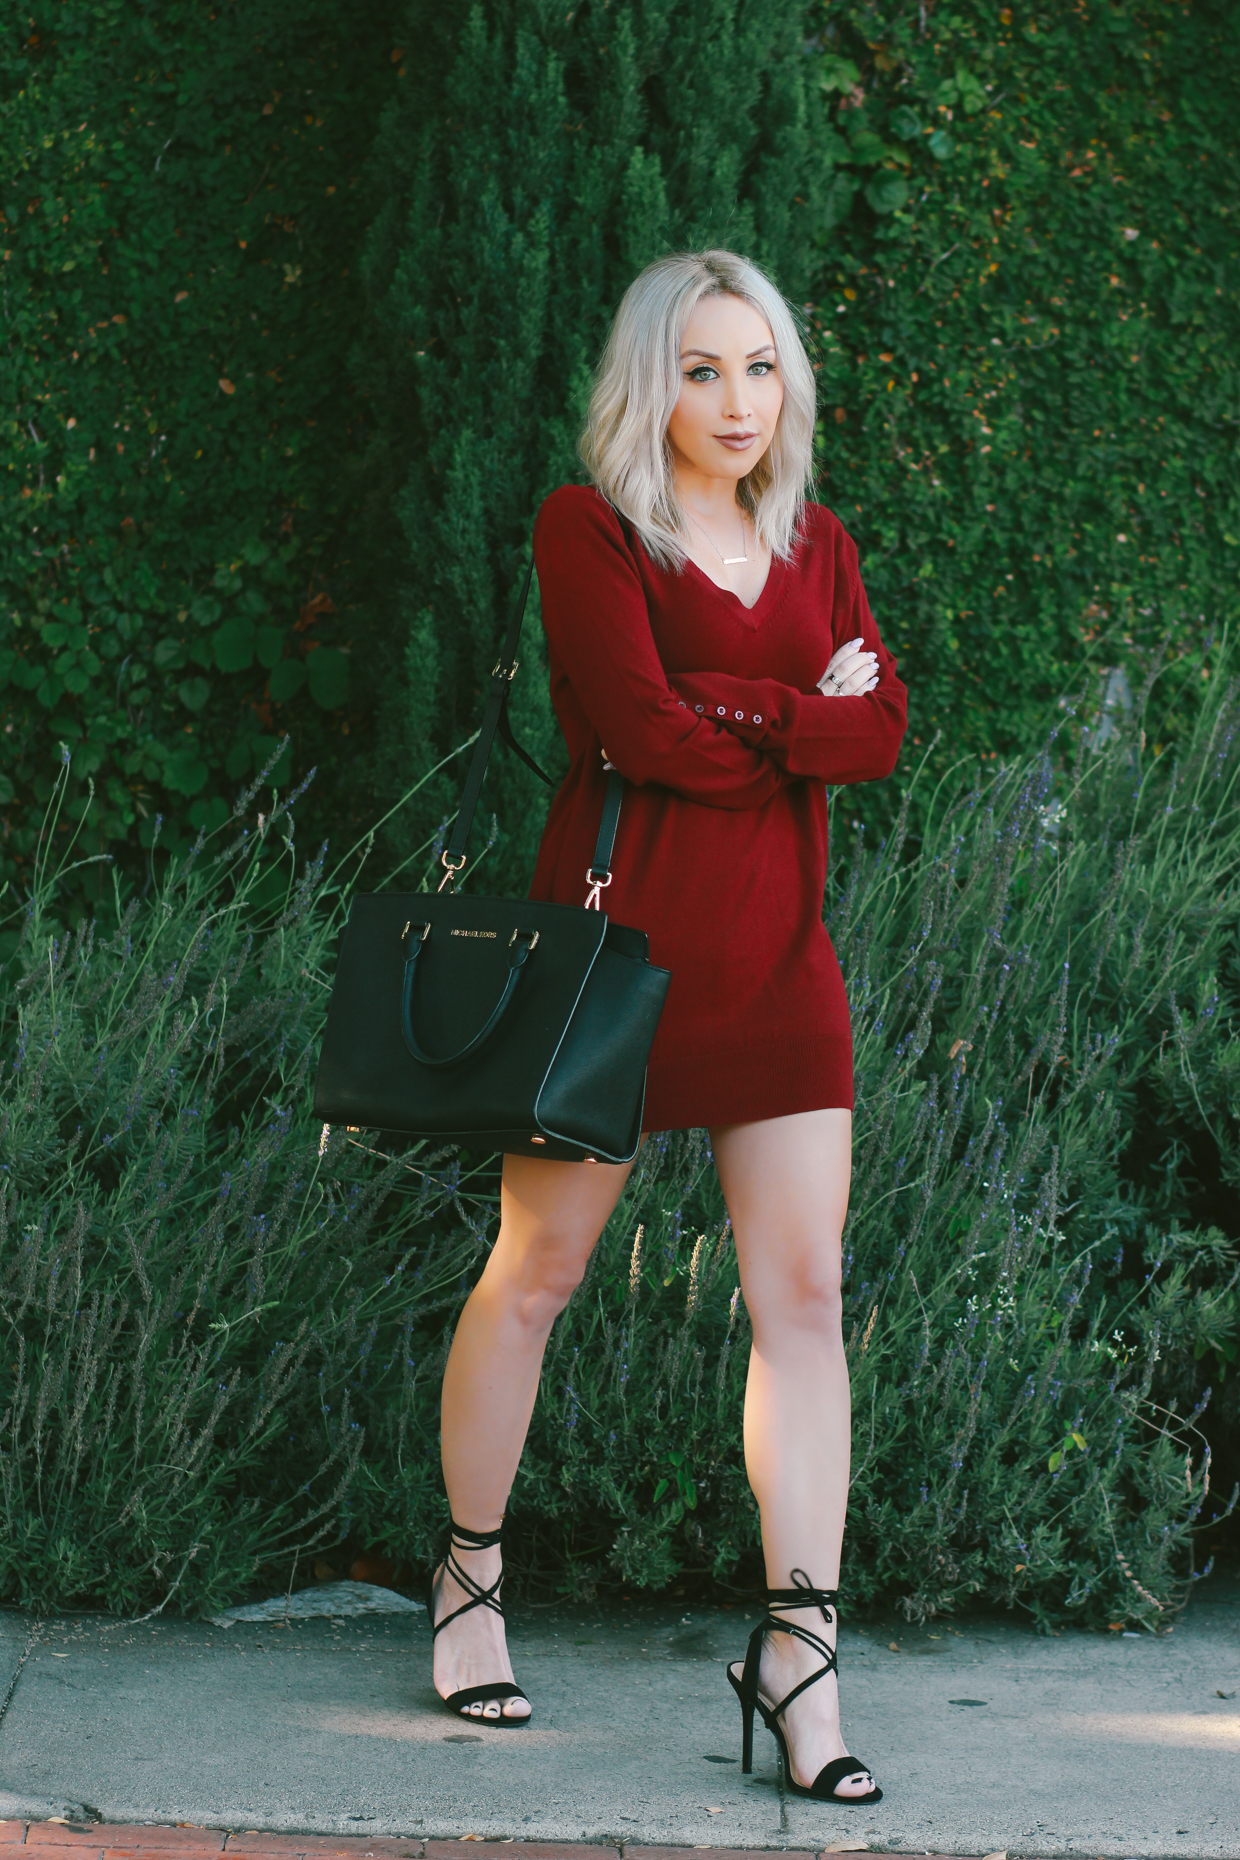 Blondie in the City | Burgundy Sweater Dress | Styling A Sweater Dress